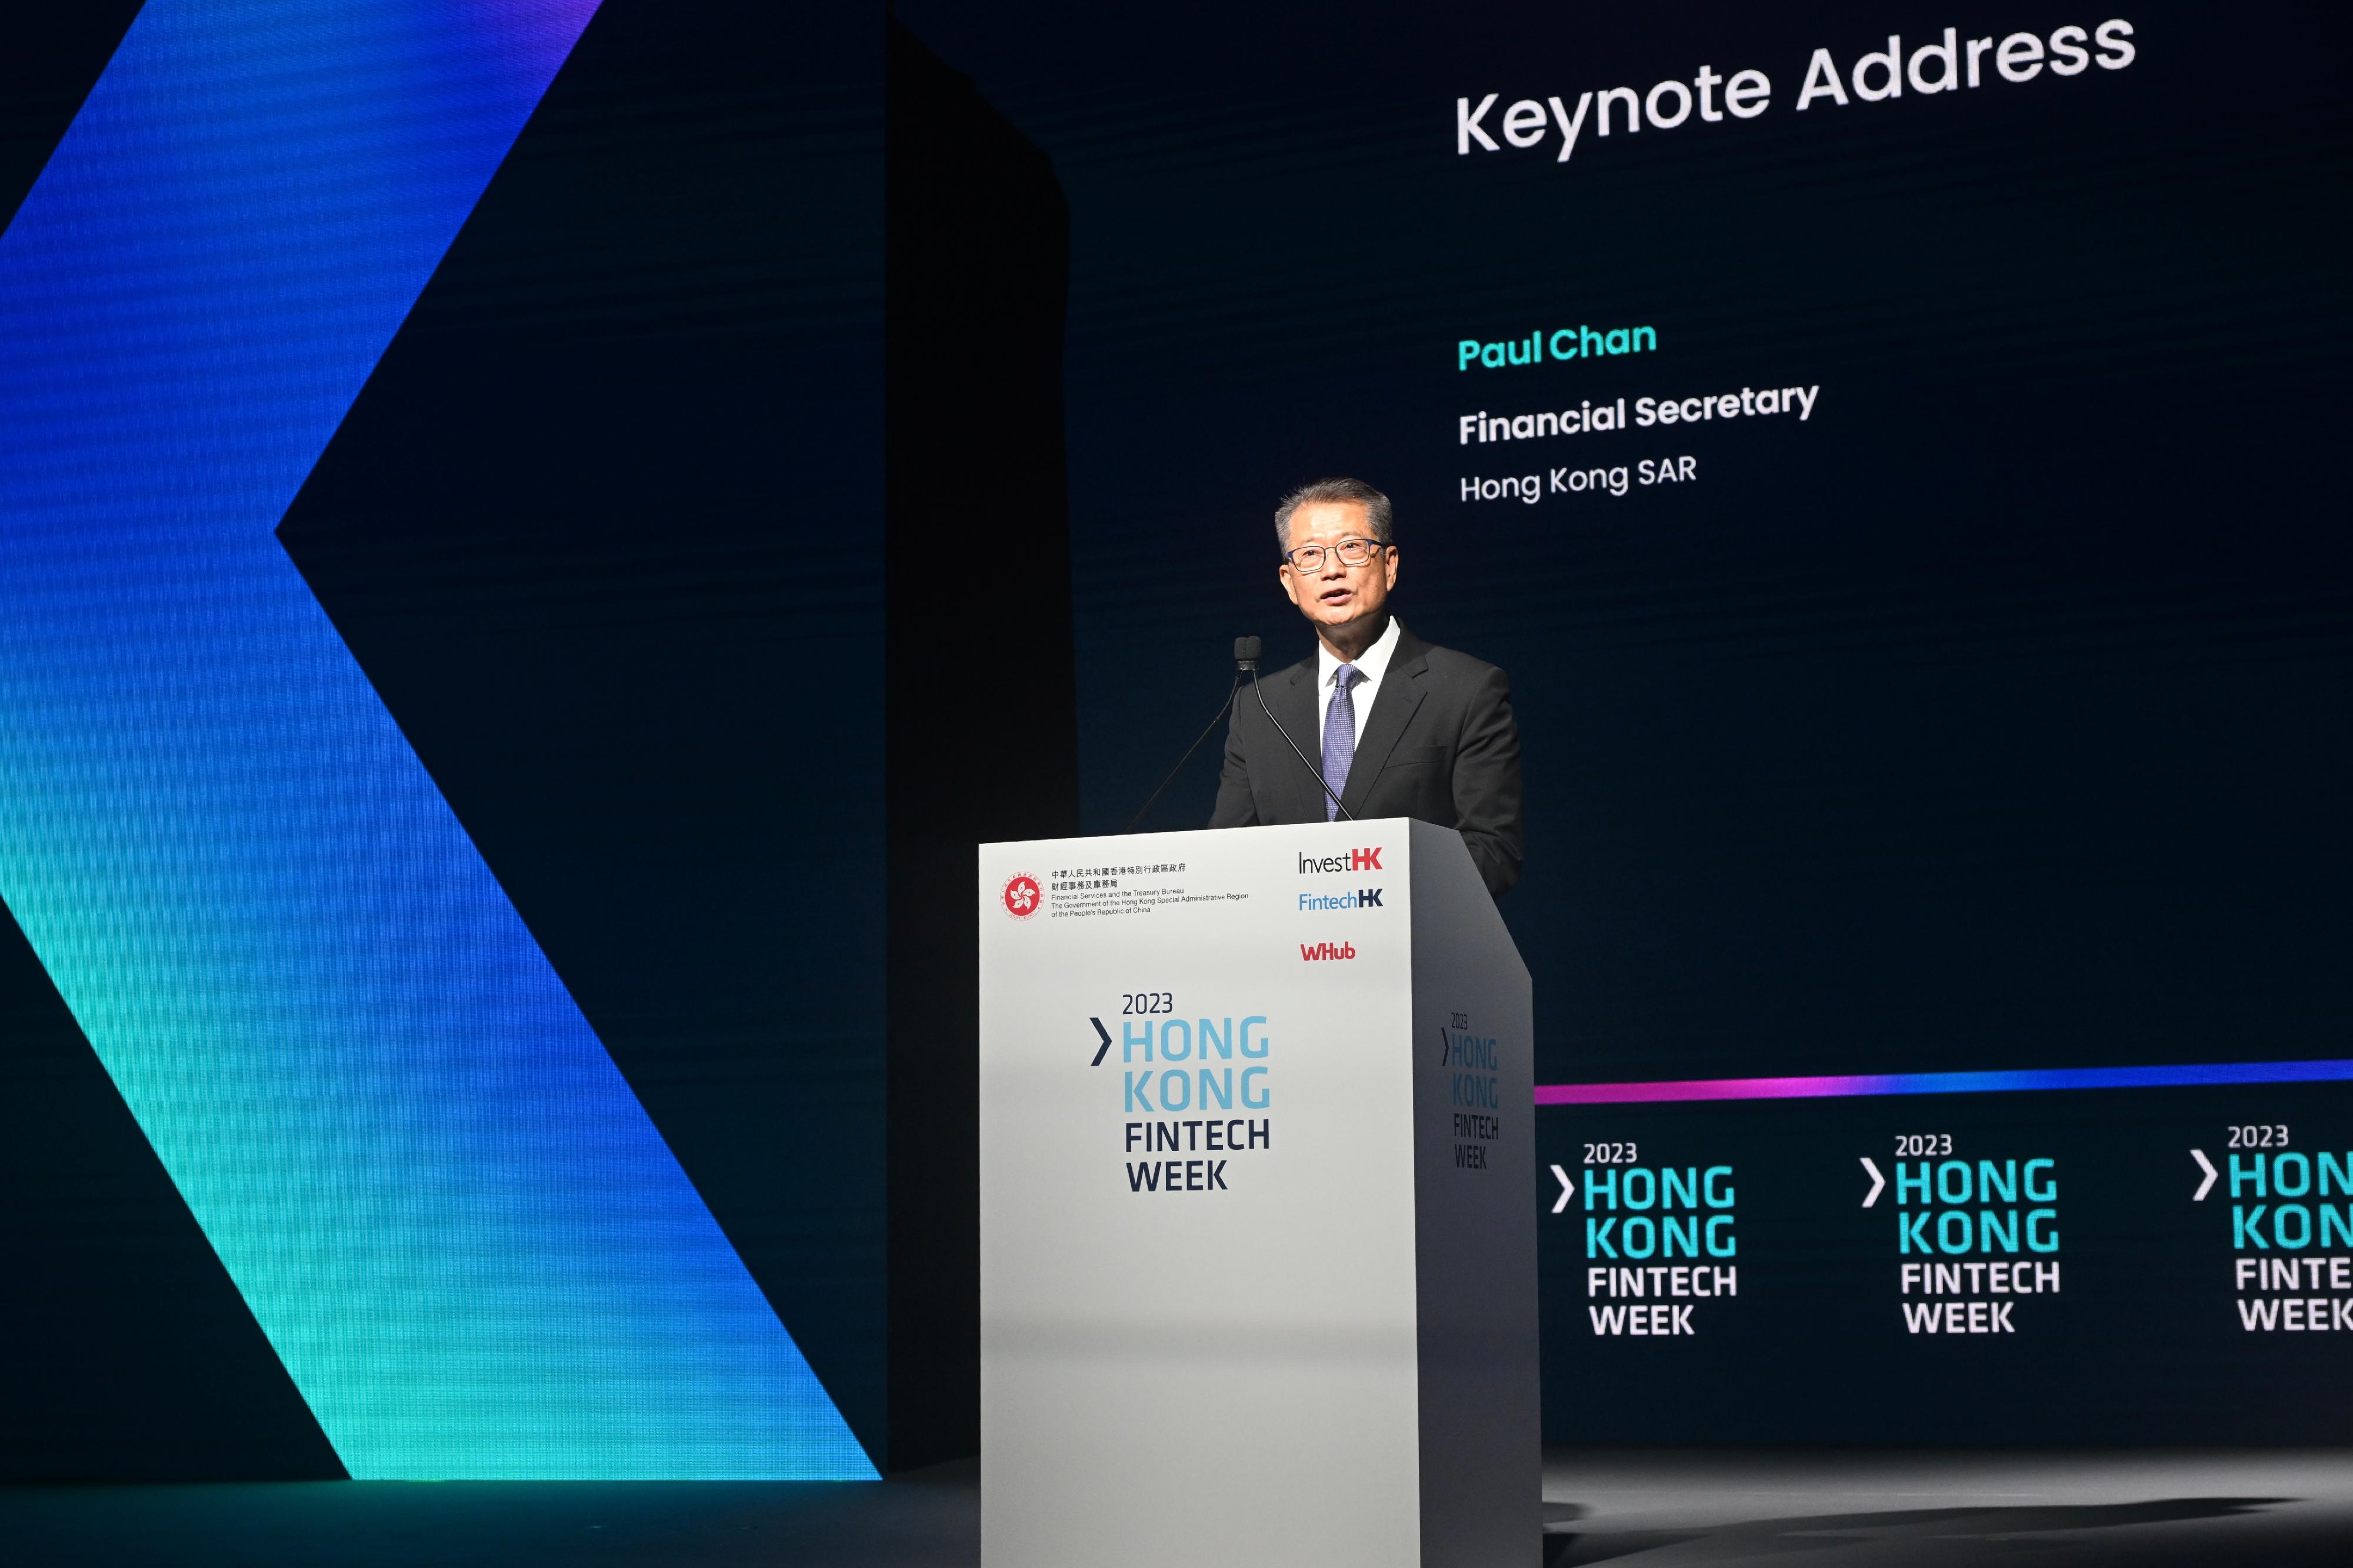 Hong Kong FinTech Week 2023 concluded on November 5, capping off a week-long feast of fintech that included the Greater Bay Area Day on October 31 and the two-day main conference on November 2 and 3. Photo shows the Financial Secretary, Mr Paul Chan, speaking at Hong Kong FinTech Week 2023 on November 2.